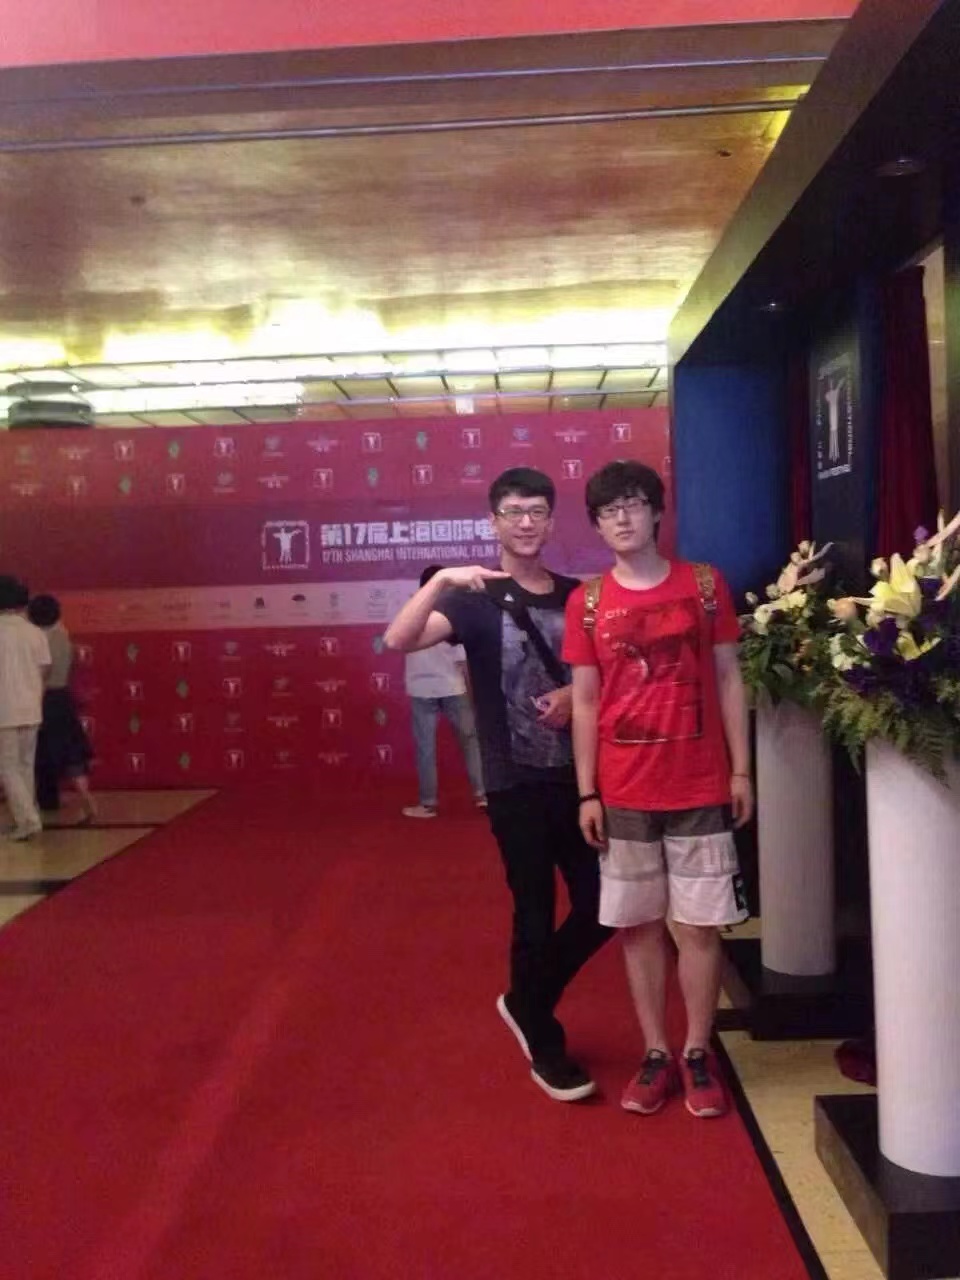 It is our ceremony, taking a group photo at Guangming Cinema during the Shanghai Film Festival every year